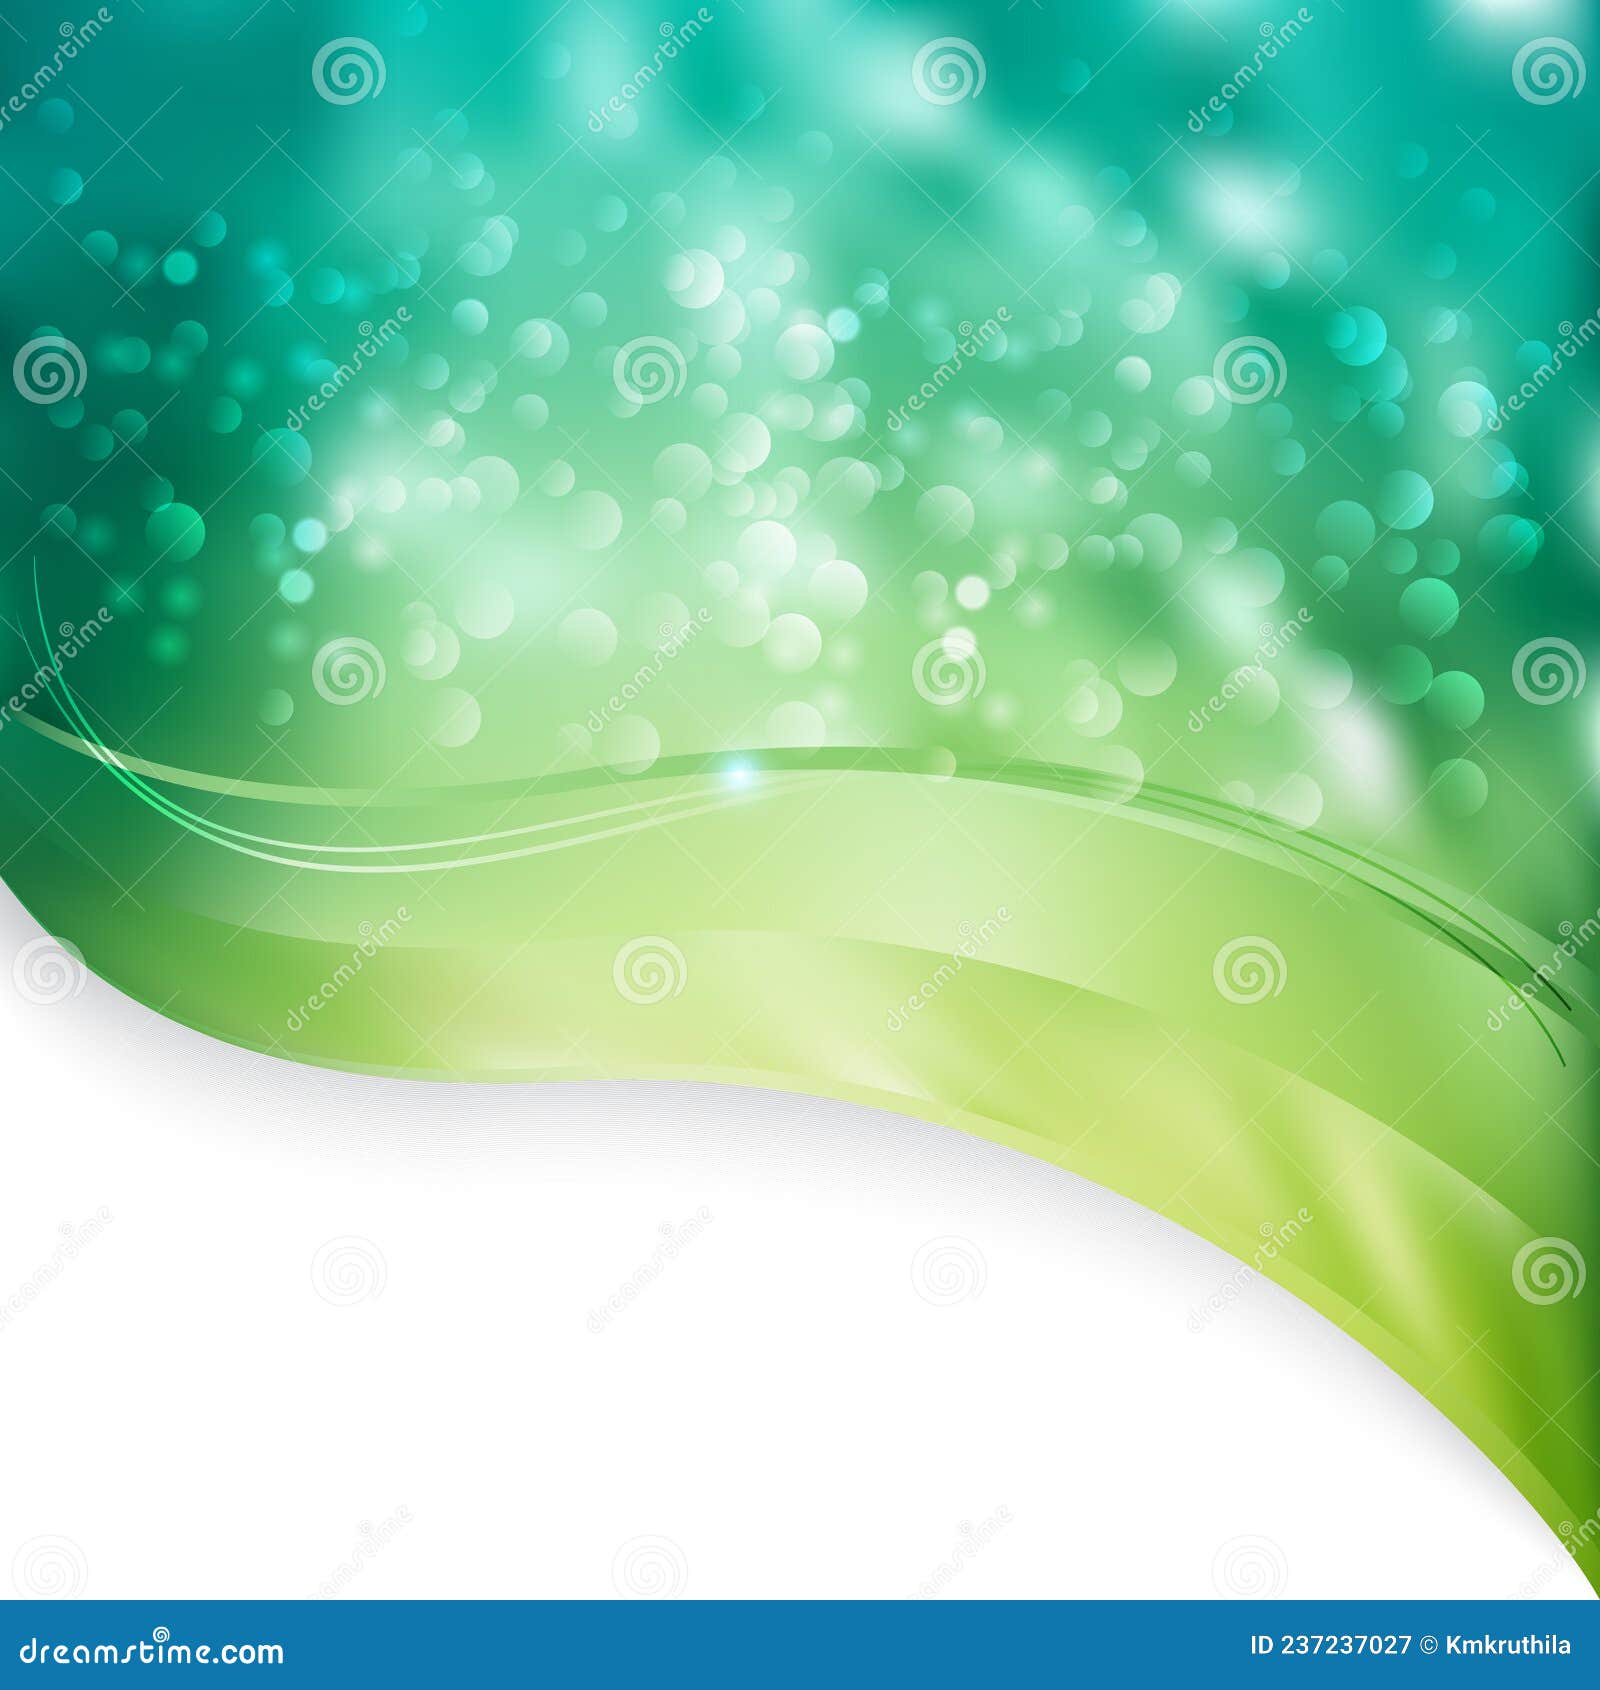 Blue and Green Wave Powerpoint Background Vector Image Beautiful Elegant  Illustration Stock Vector - Illustration of brochure, decorative: 237237027